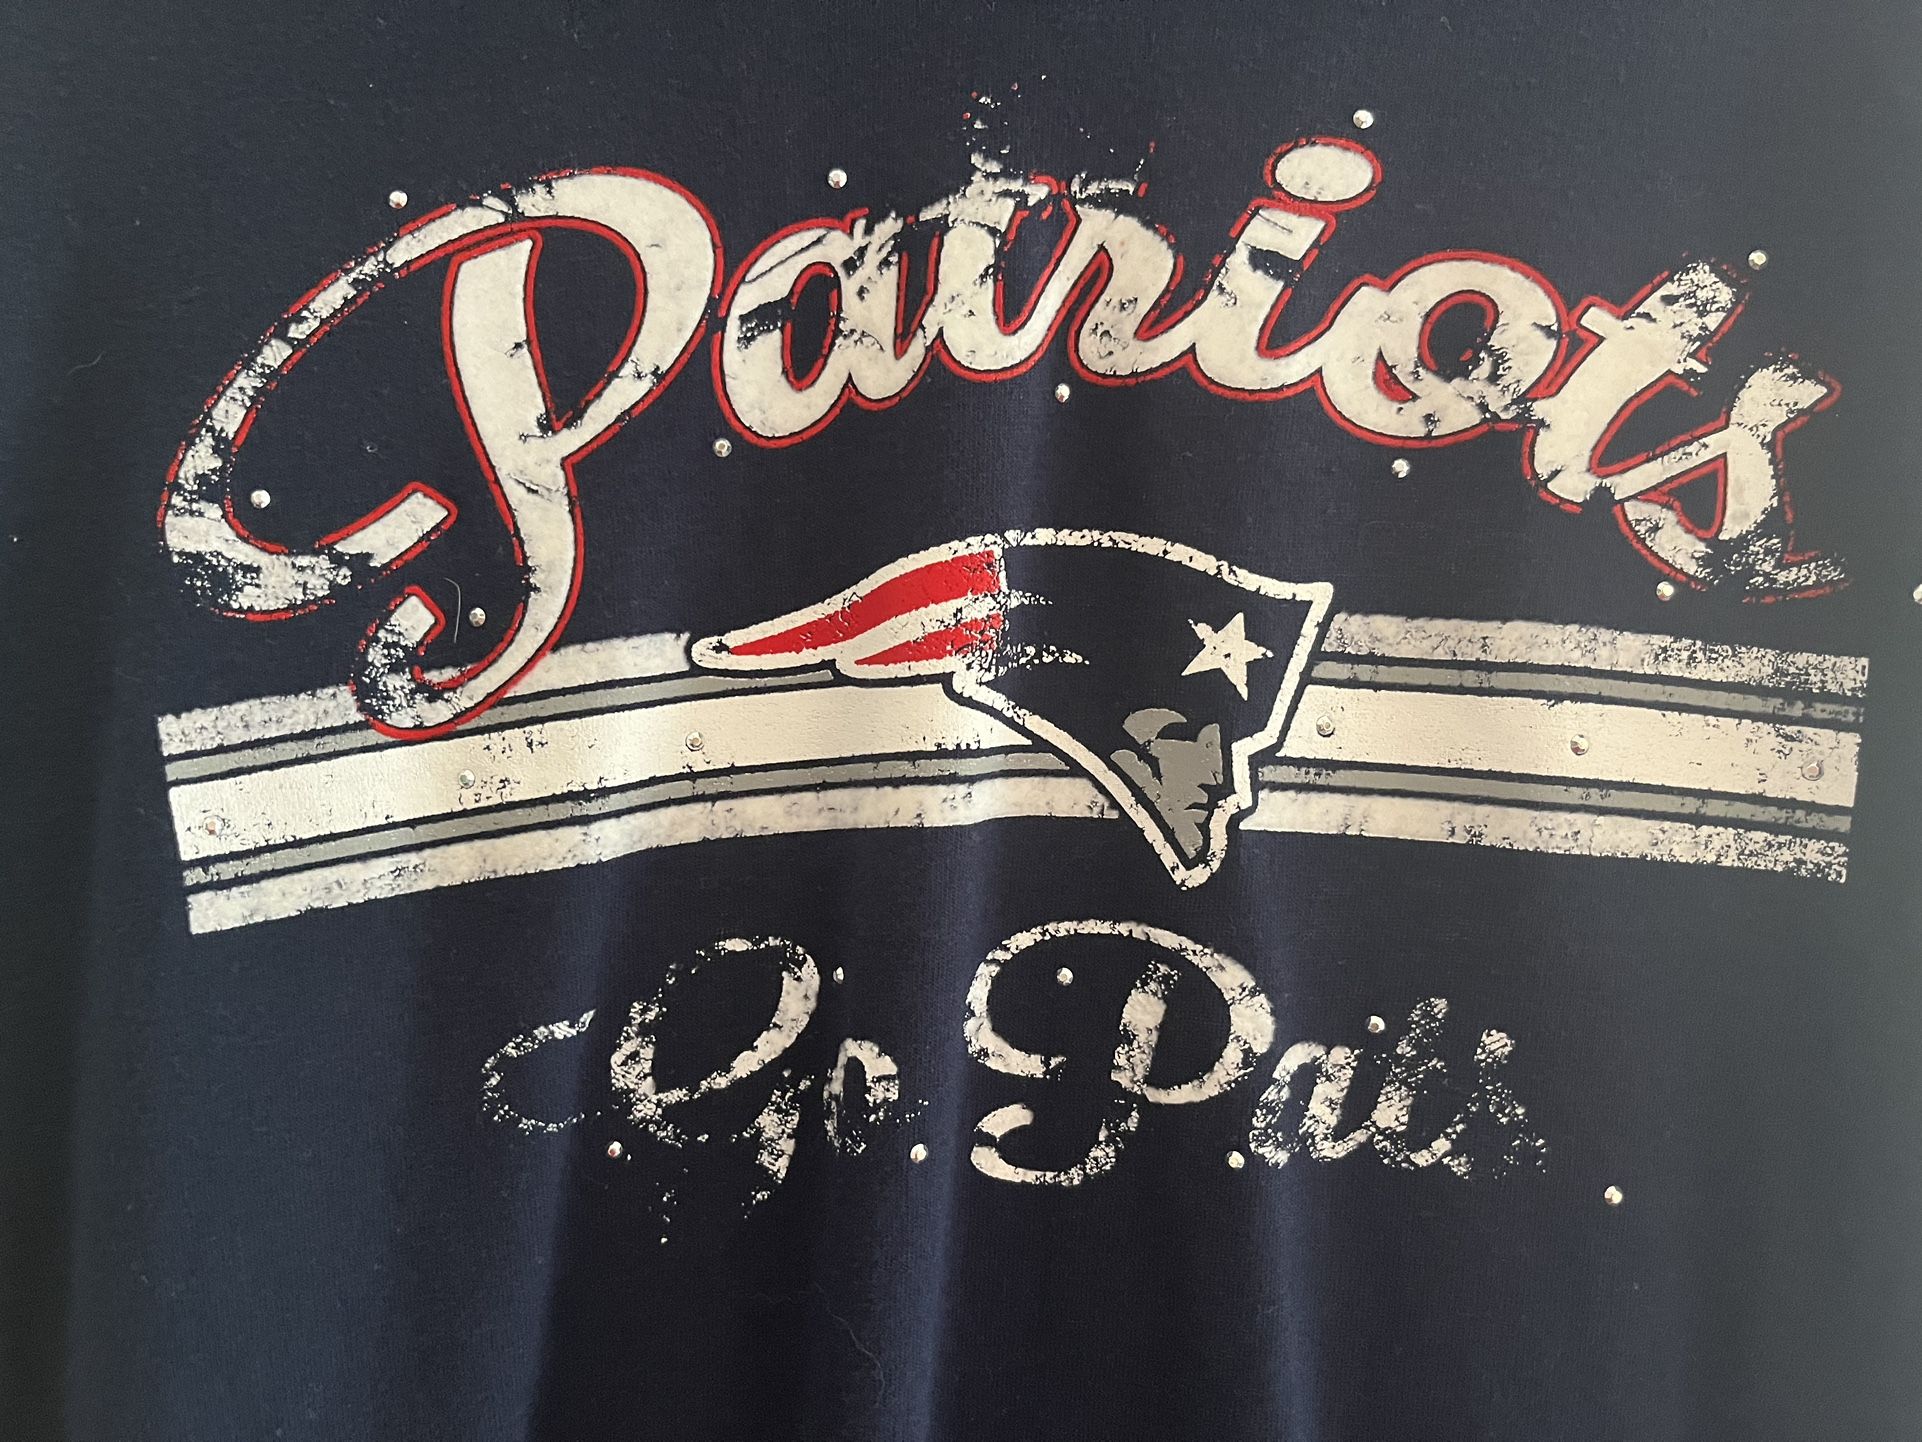 New England Patriots Jersey- New!  Large